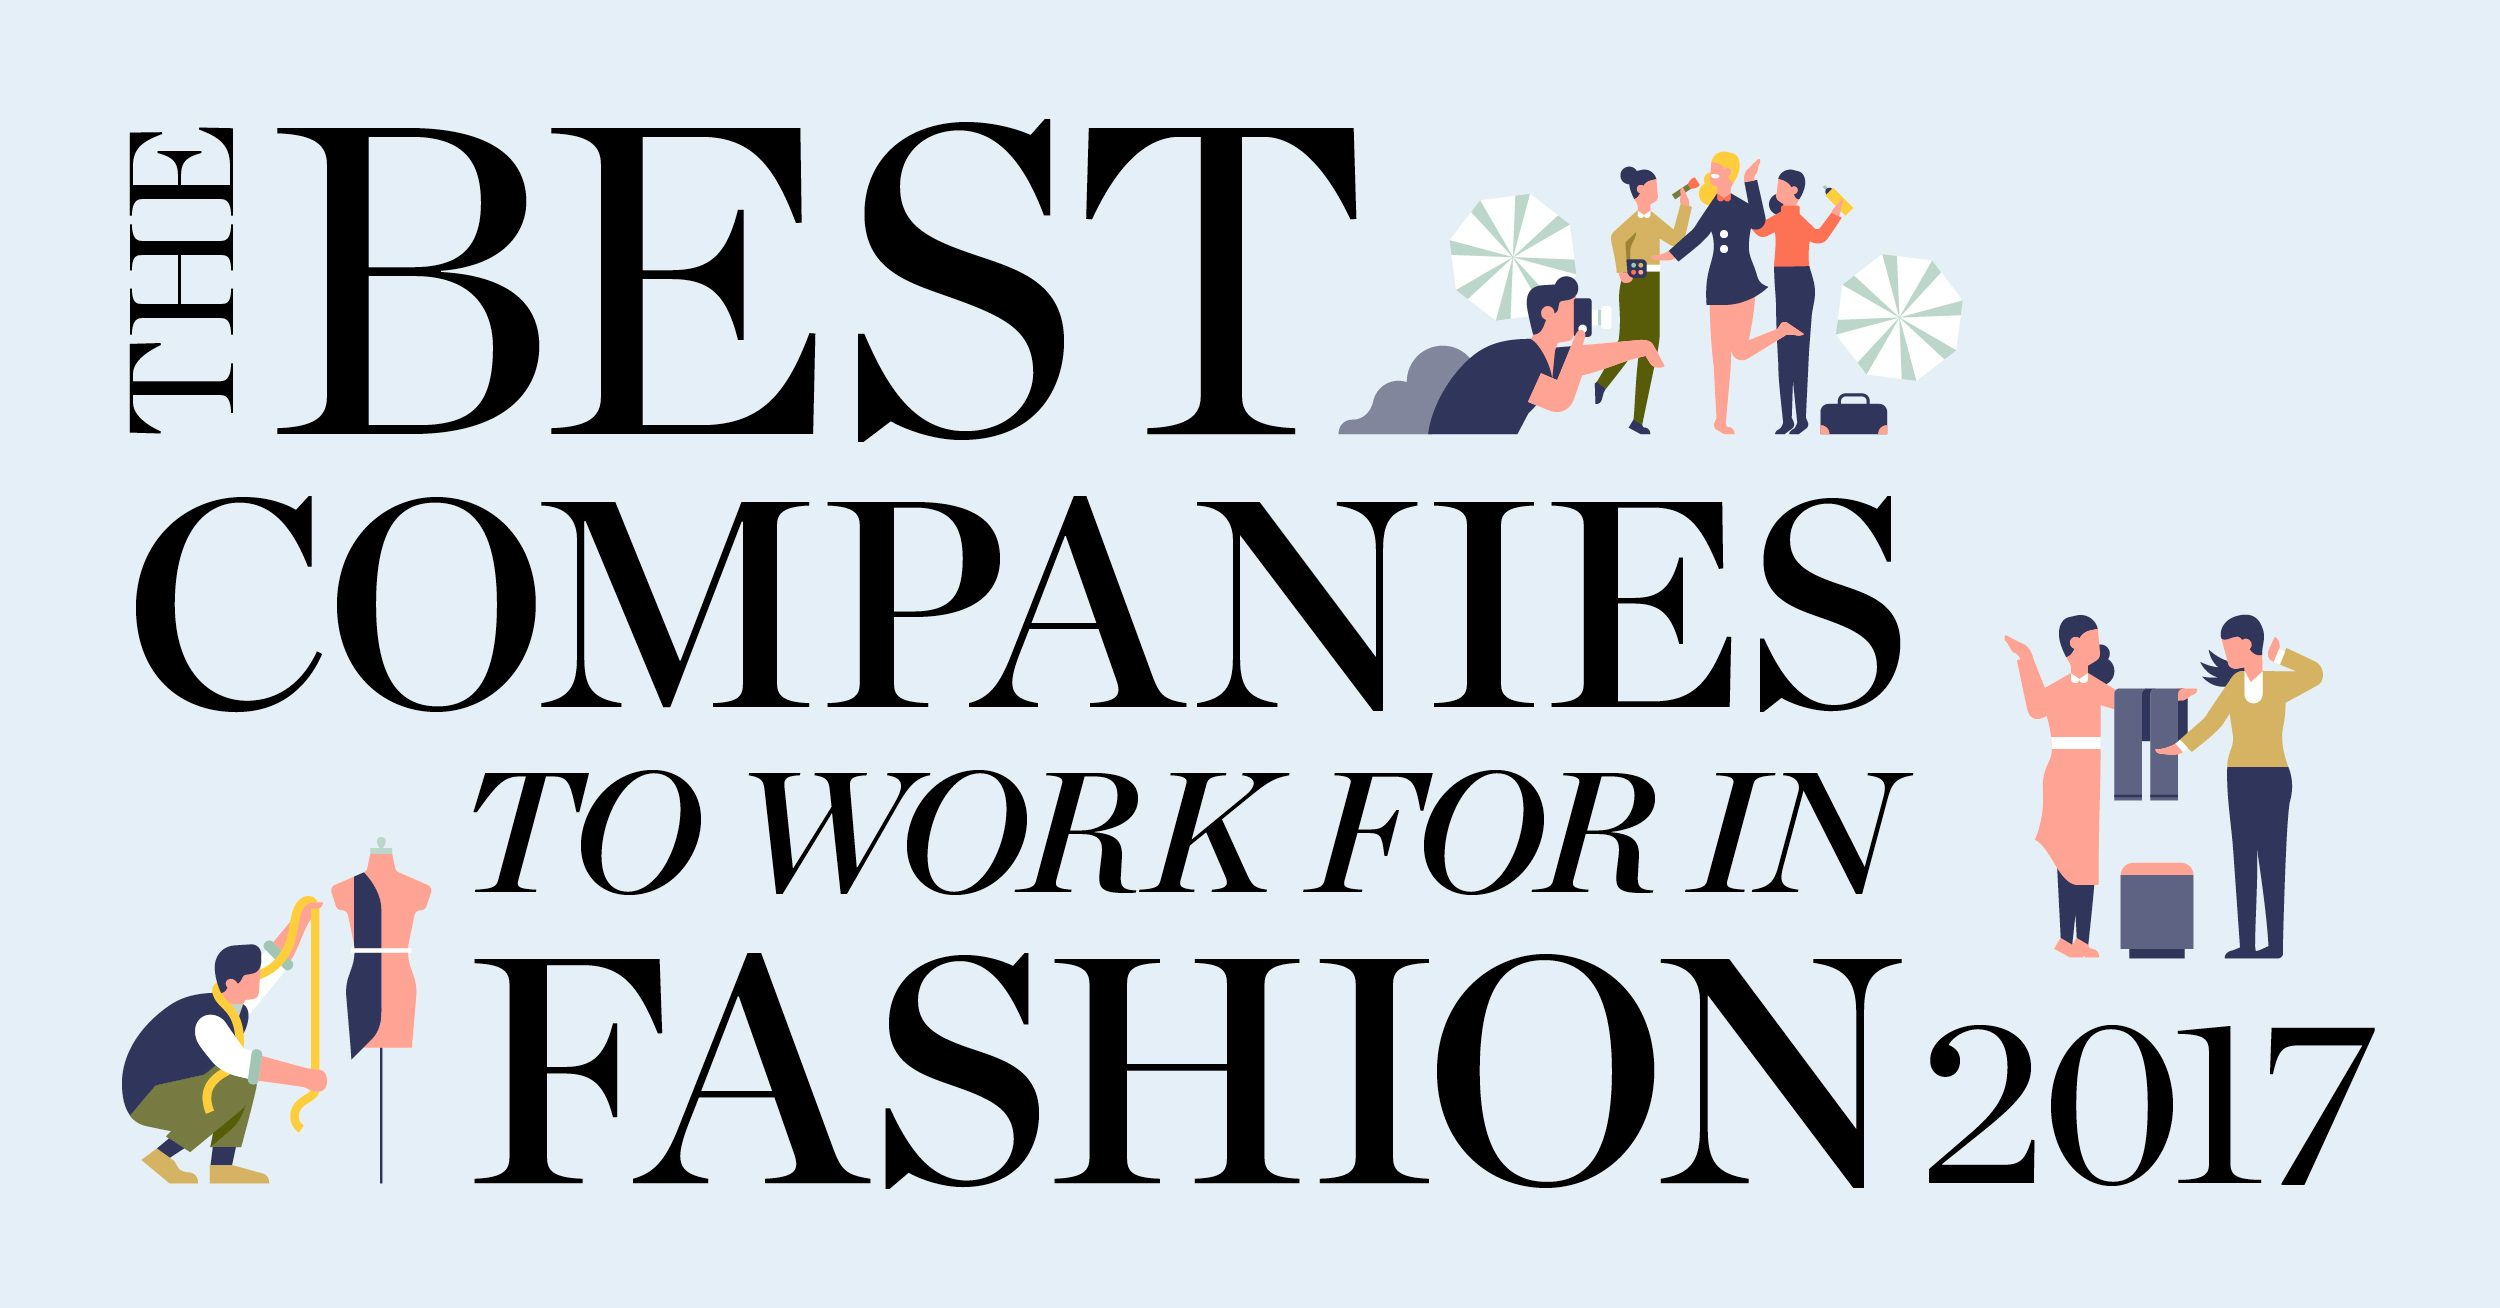 The 15 Best Companies to Work for in Fashion 2017